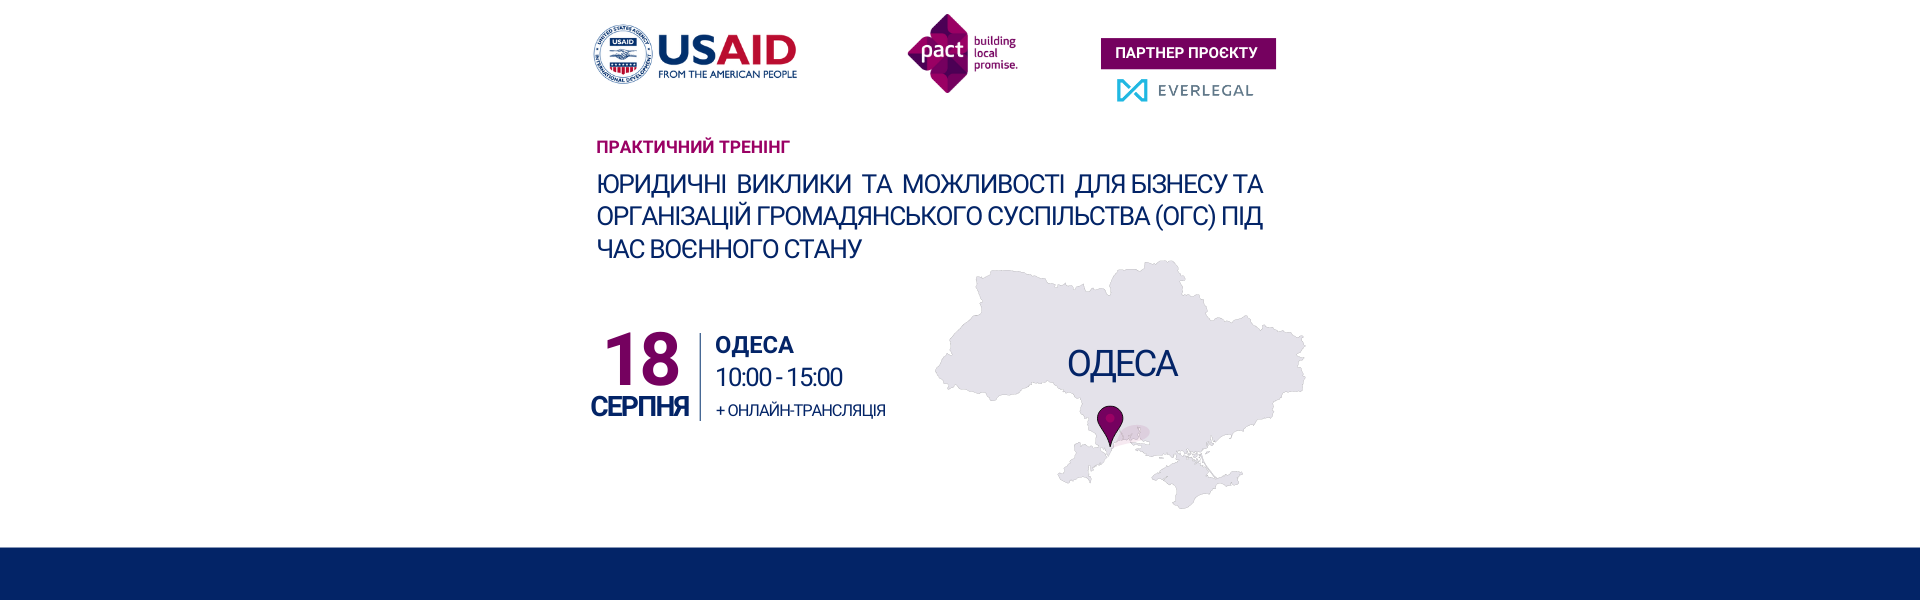 Practical training for business and civil society organisations in Odessa